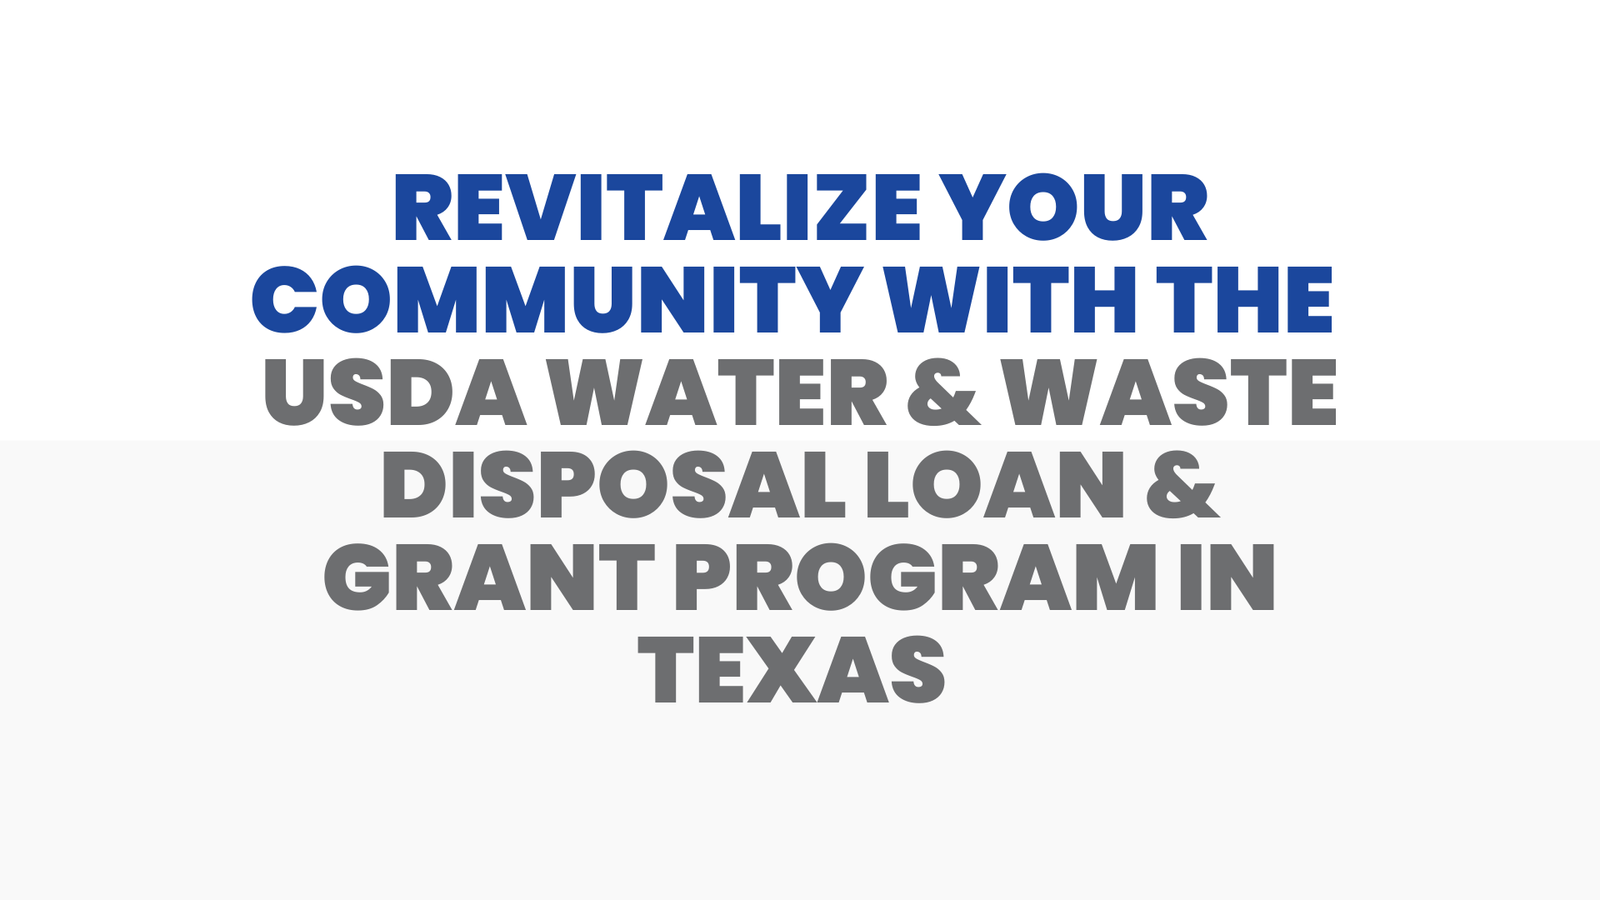 Revitalize Your Community with the USDA Water & Waste Disposal Loan